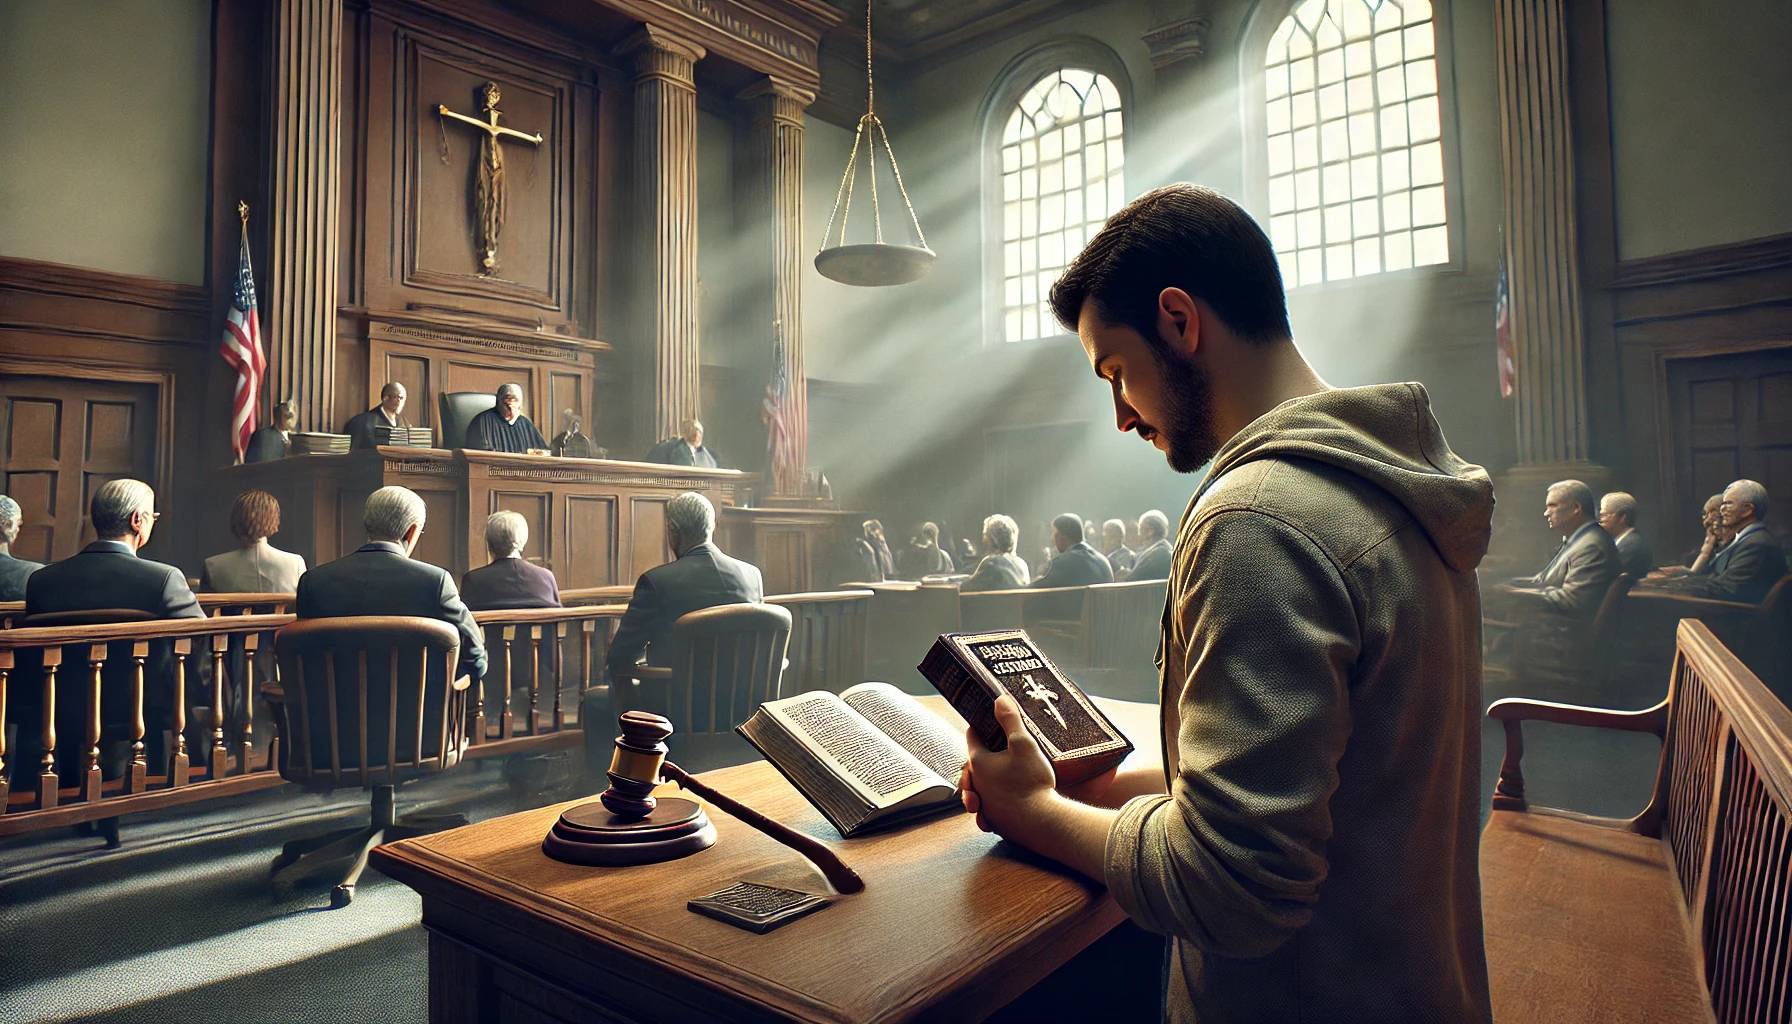 20 Miracle Prayers For Court Cases